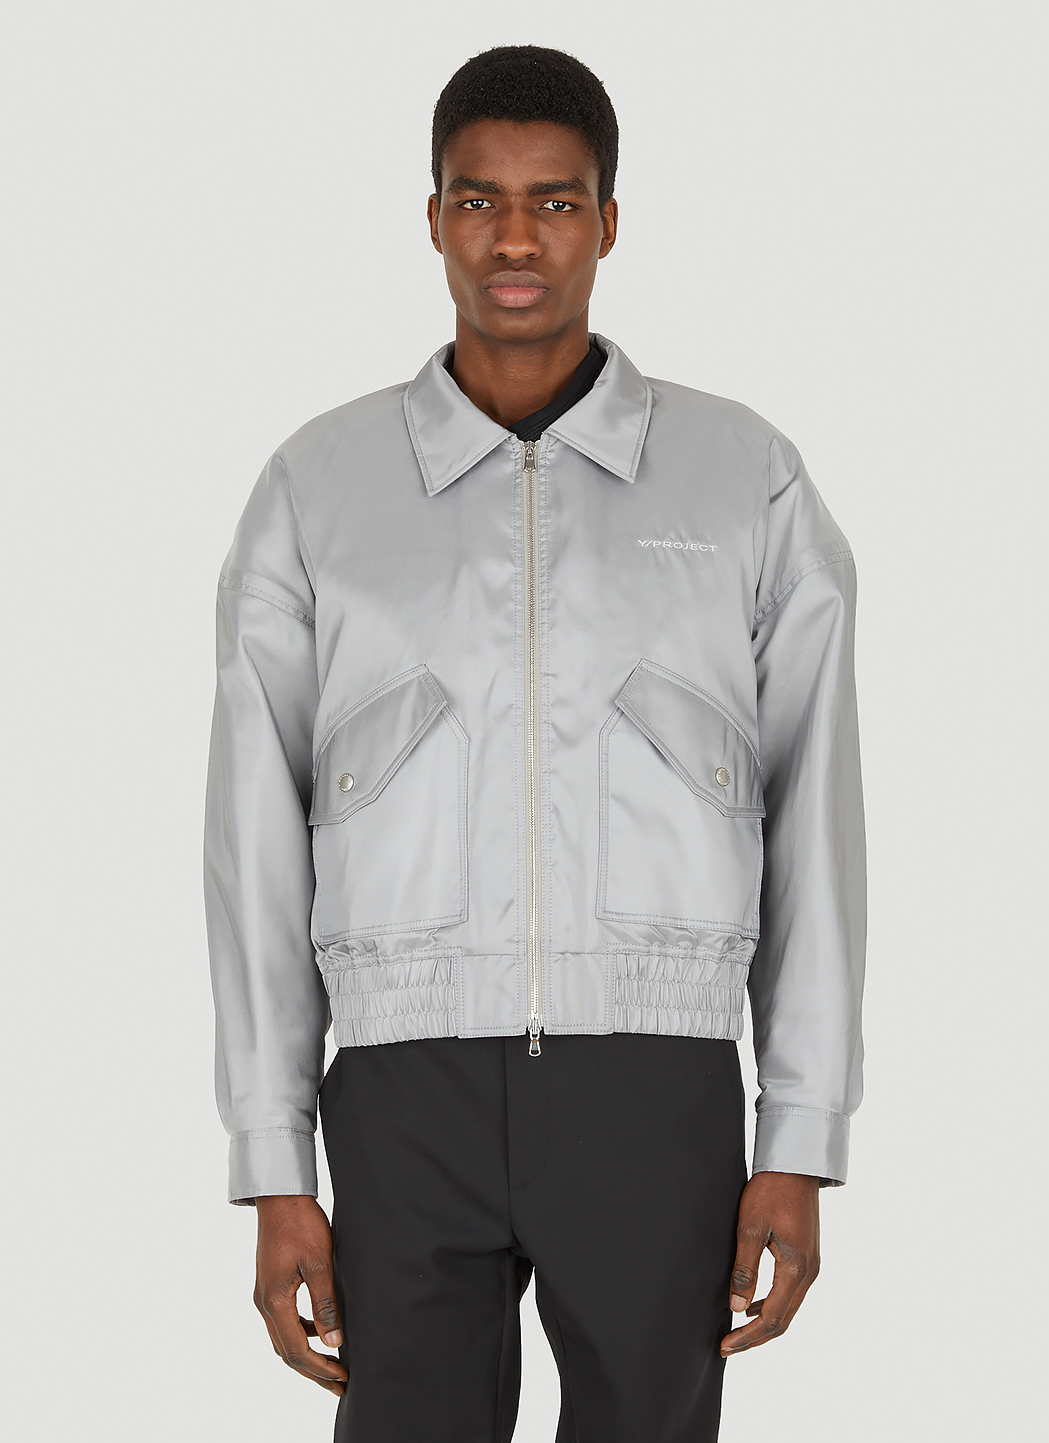 Y/Project Draped Shoulder Bomber Jacket in Grey | LN-CC